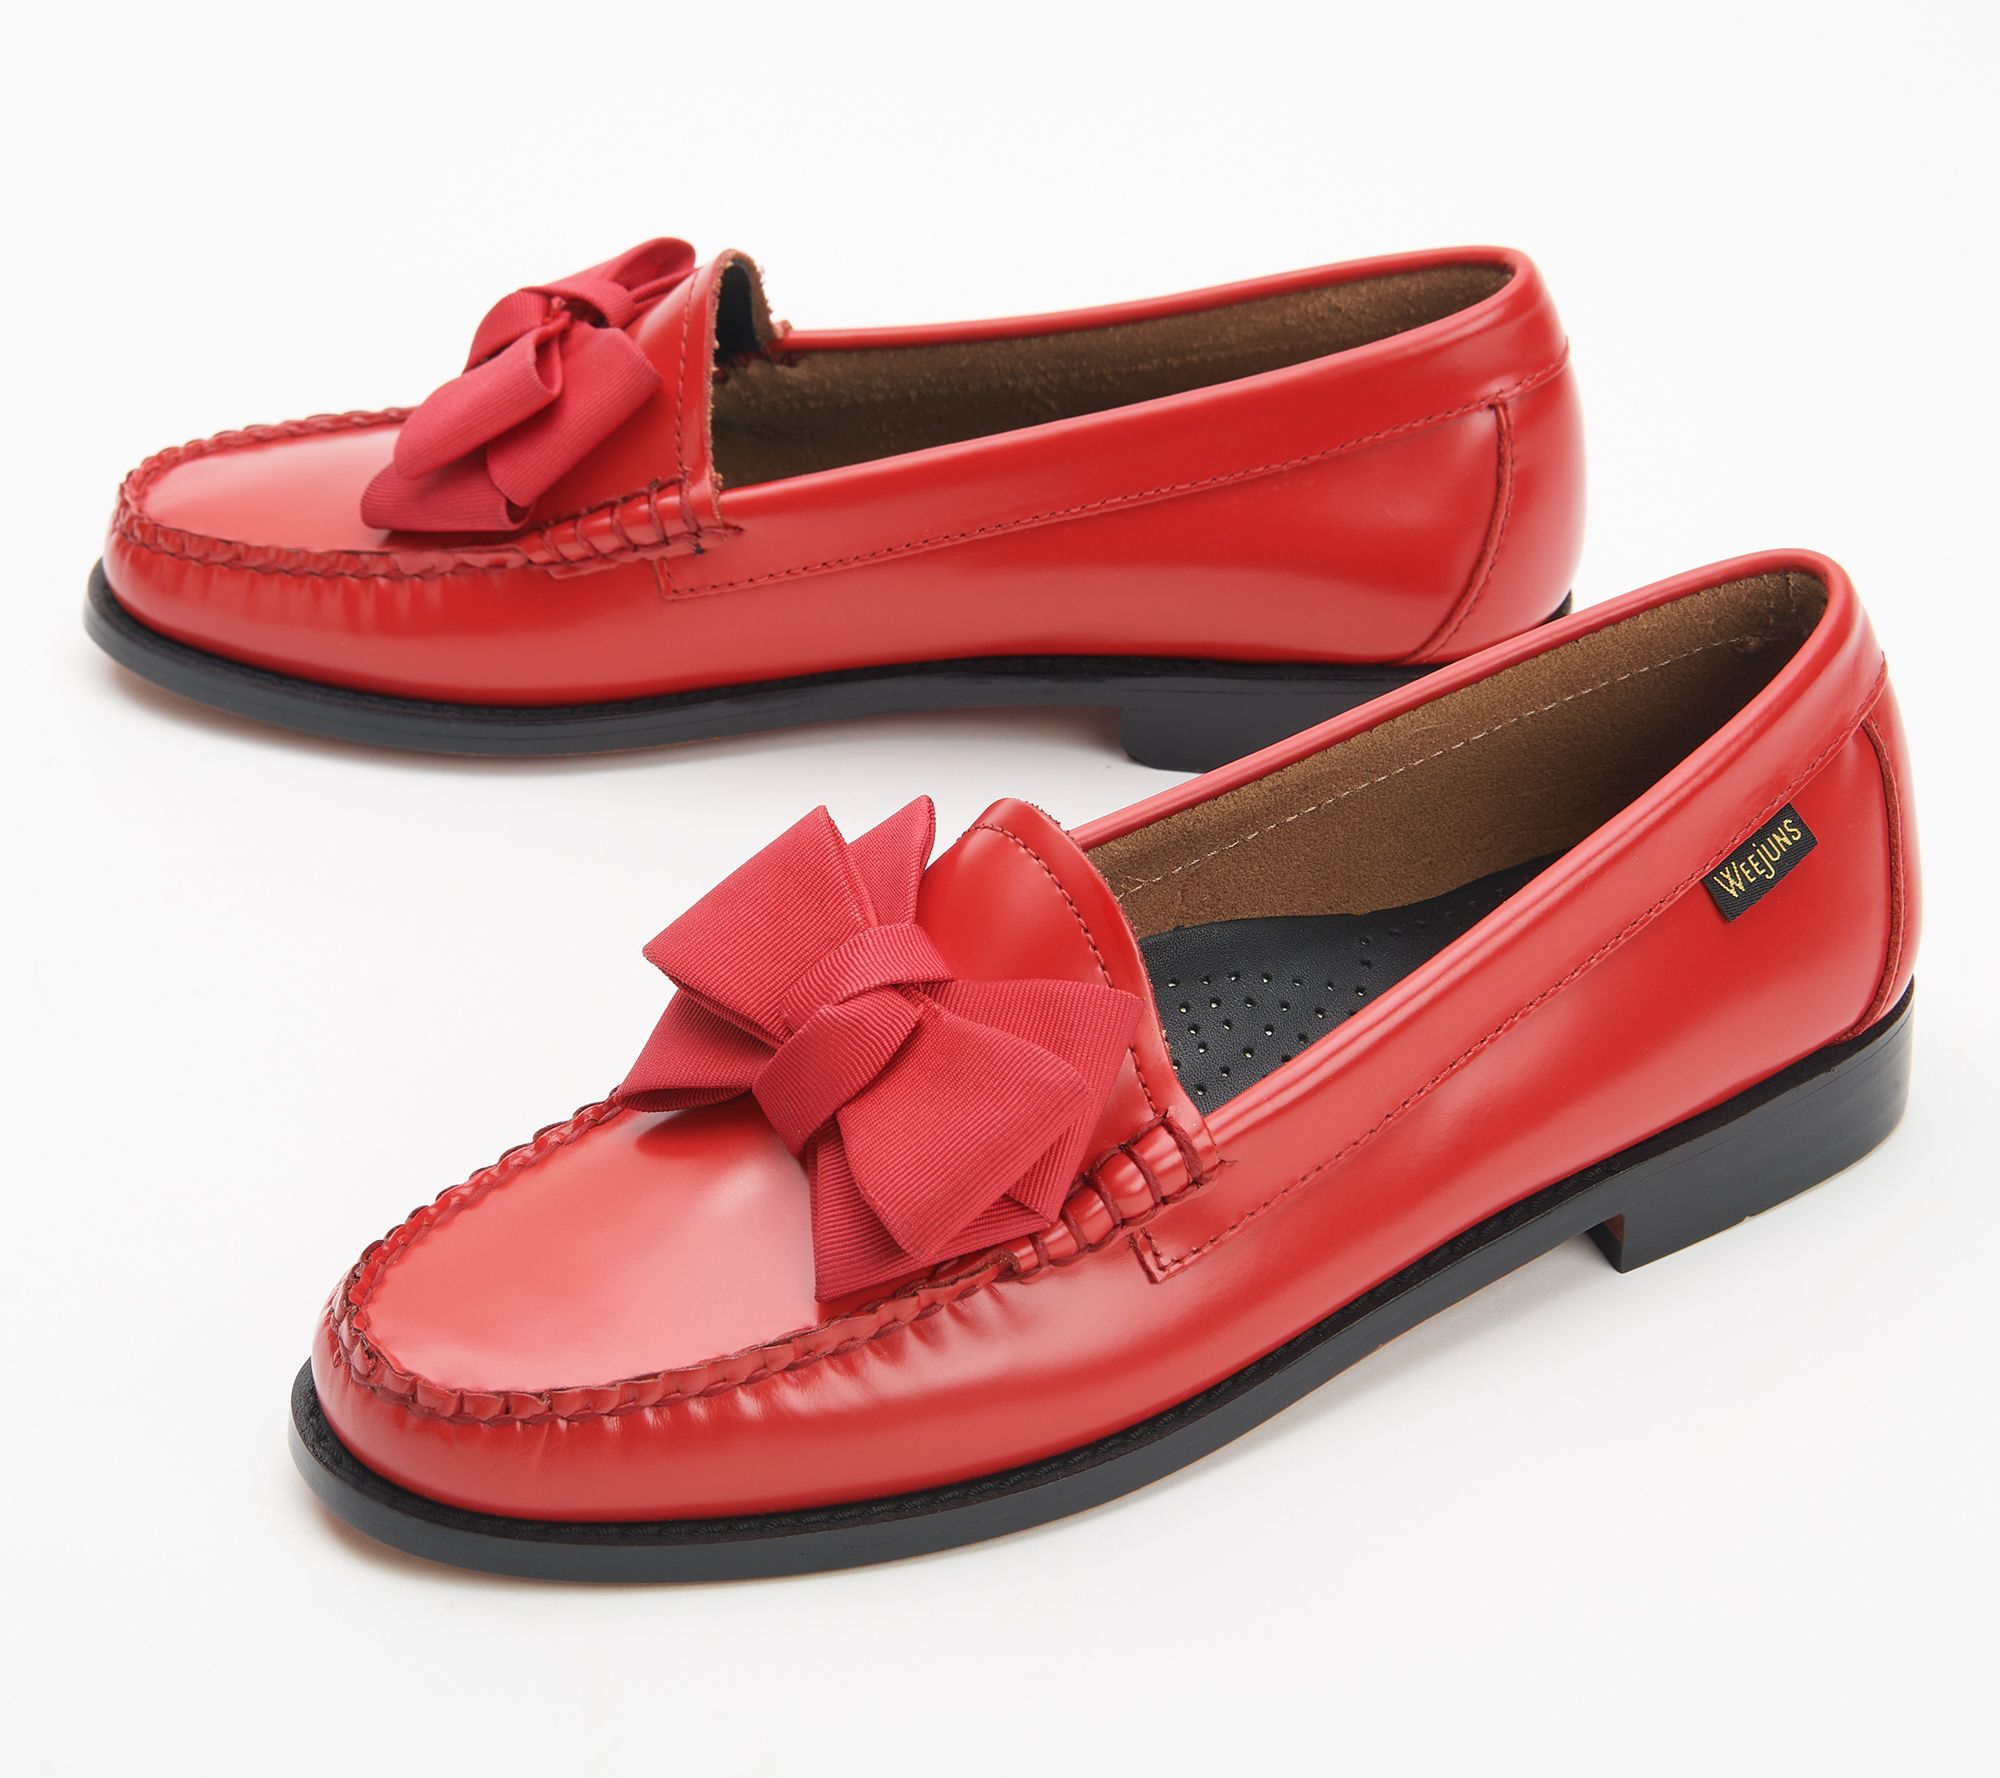 G.H. Originals Weejuns Penny Loafers - Bow - QVC.com